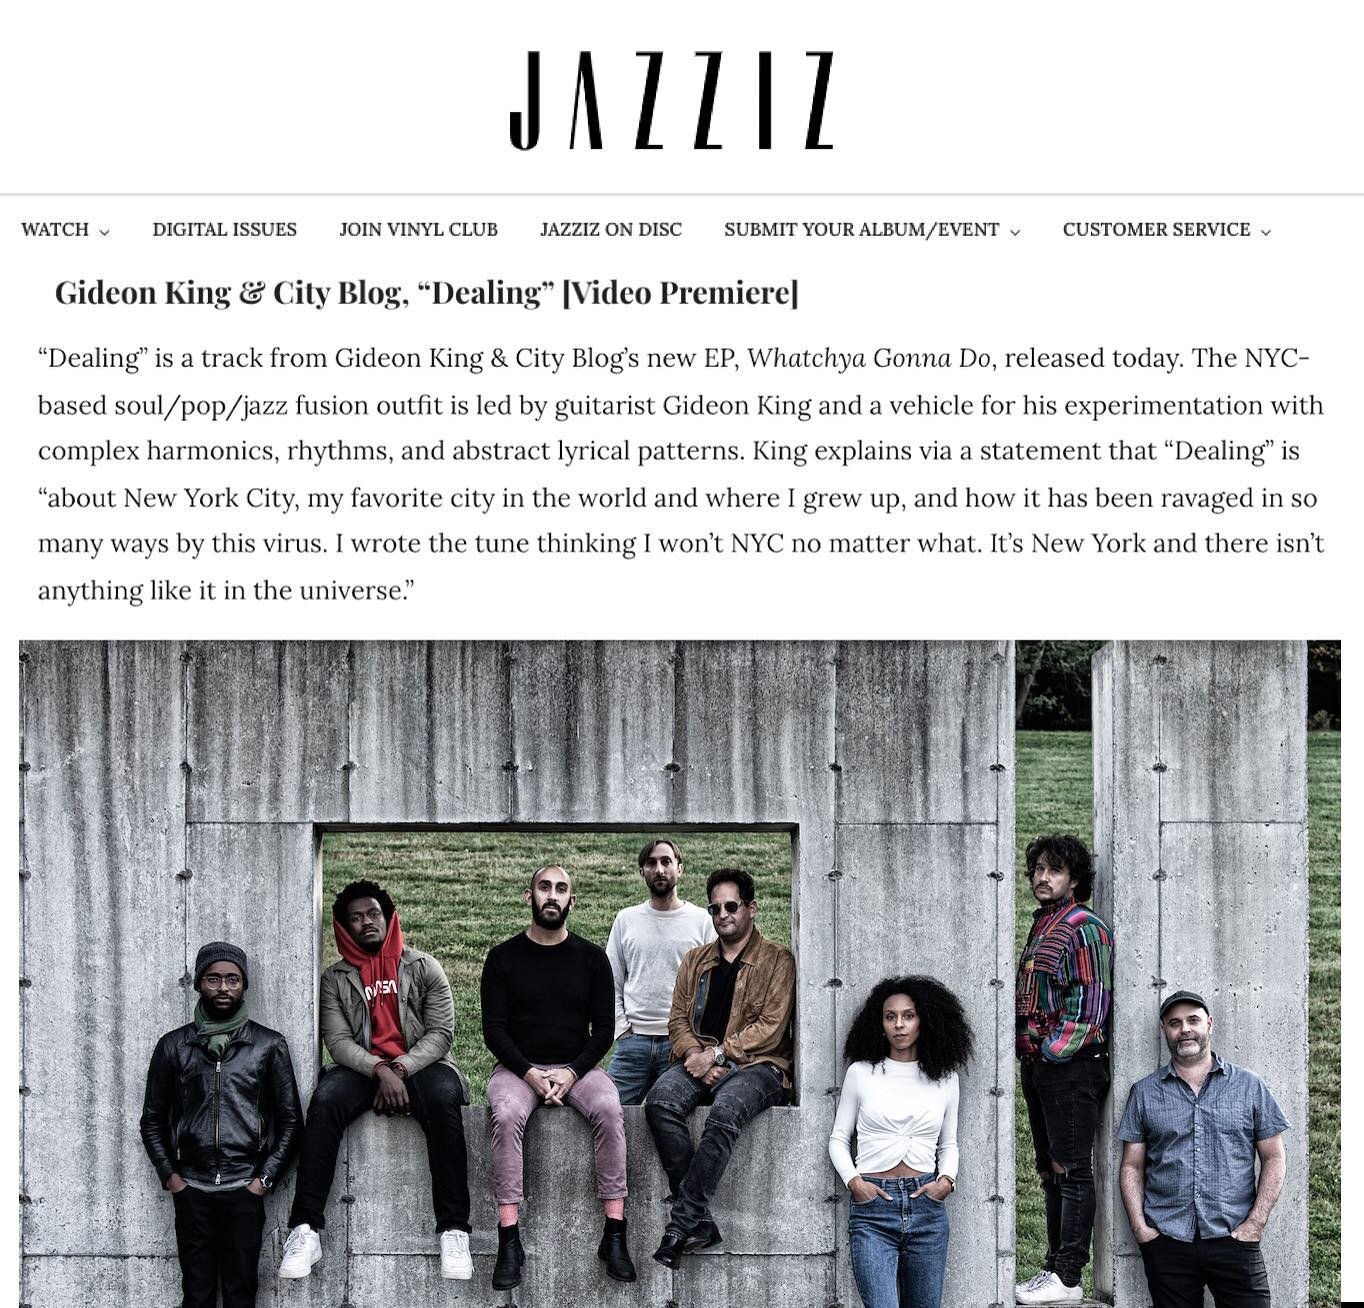 With the premiere of their latest single &ldquo;Dealing&rdquo; via @jazzizmagazine today, @gideonkingcityblog unveil the final piece of their &lsquo;Whatchya Gonna Do&rsquo; EP, out now on all digital platforms. Featuring vocals by Mike Stephenson an